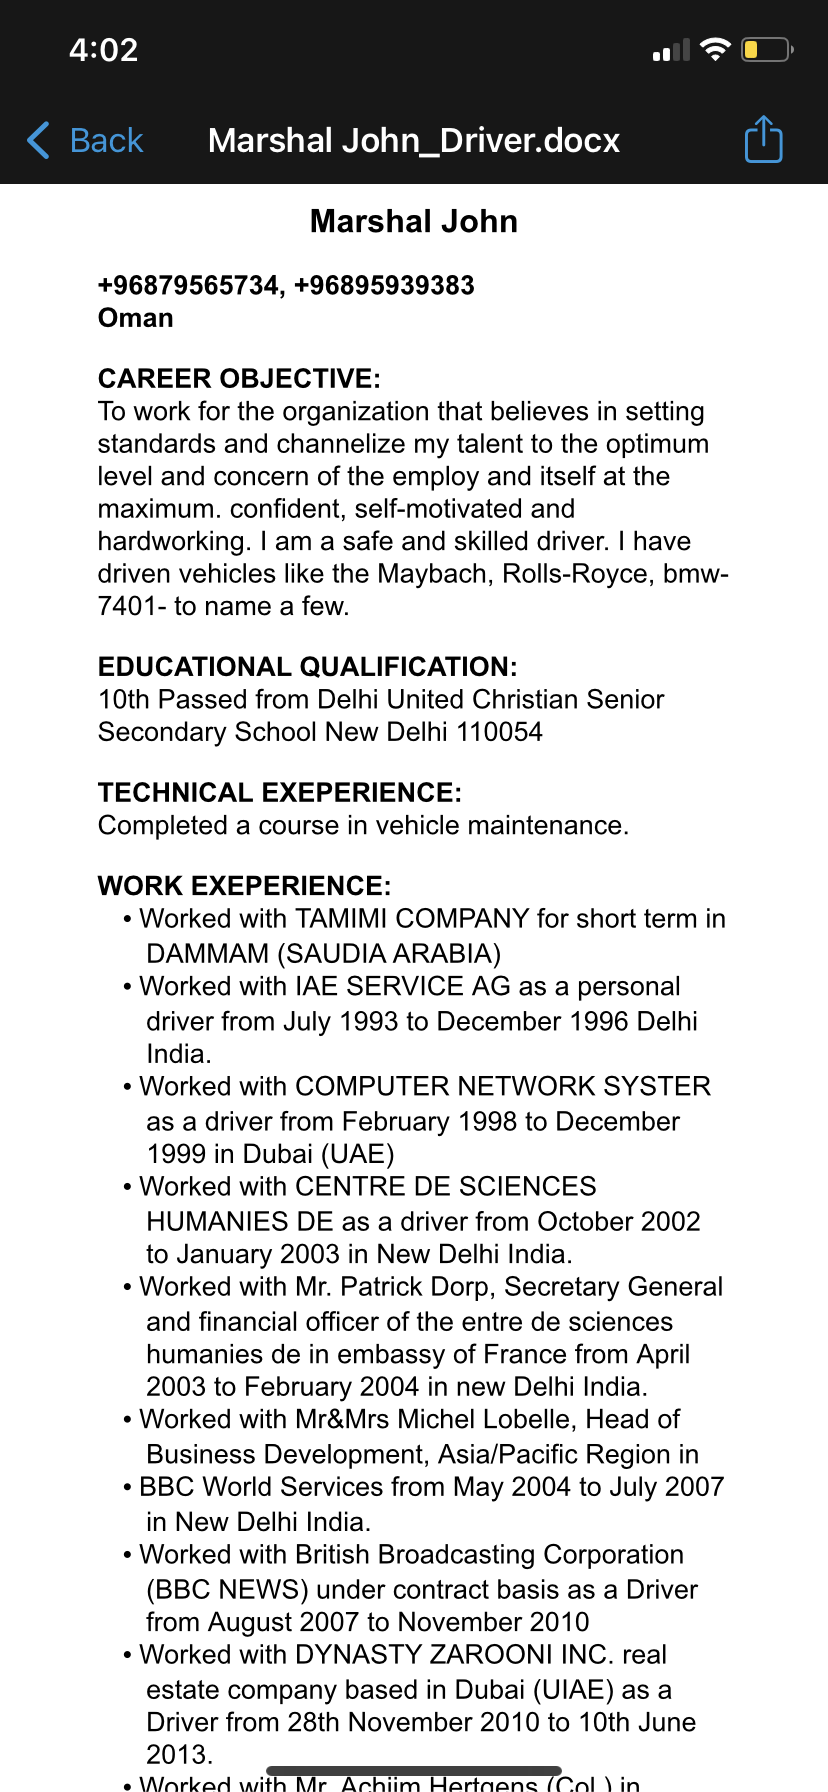 Marshal John_Driver.docx

 

Marshal John

+96879565734, +96895939383
Oman

CAREER OBJECTIVE:

To work for the organization that believes in setting
standards and channelize my talent to the optimum
level and concern of the employ and itself at the
maximum. confident, self-motivated and
hardworking. | am a safe and skilled driver. | have
driven vehicles like the Maybach, Rolls-Royce, bmw-
7401- to name a few.

EDUCATIONAL QUALIFICATION:
10th Passed from Delhi United Christian Senior
Secondary School New Delhi 110054

TECHNICAL EXEPERIENCE:
Completed a course in vehicle maintenance.

WORK EXEPERIENCE:

» Worked with TAMIMI COMPANY for short term in
DAMMAM (SAUDIA ARABIA)

« Worked with IAE SERVICE AG as a personal
driver from July 1993 to December 1996 Delhi
India.

» Worked with COMPUTER NETWORK SYSTER
as a driver from February 1998 to December
1999 in Dubai (UAE)

» Worked with CENTRE DE SCIENCES
HUMANIES DE as a driver from October 2002
to January 2003 in New Delhi India.

* Worked with Mr. Patrick Dorp, Secretary General
and financial officer of the entre de sciences
humanies de in embassy of France from April
2003 to February 2004 in new Delhi India.

» Worked with Mr&Mrs Michel Lobelle, Head of
Business Development, Asia/Pacific Region in

« BBC World Services from May 2004 to July 2007
in New Delhi India

» Worked with British Broadcasting Corporation
(BBC NEWS) under contract basis as a Driver
from August 2007 to November 2010

» Worked with DYNASTY ZAROONI INC. real
estate company based in Dubai (UIAE) as a
Driver from 28th November 2010 to 10th June

2013.
oe Wnrked wile — eR — a a Yin